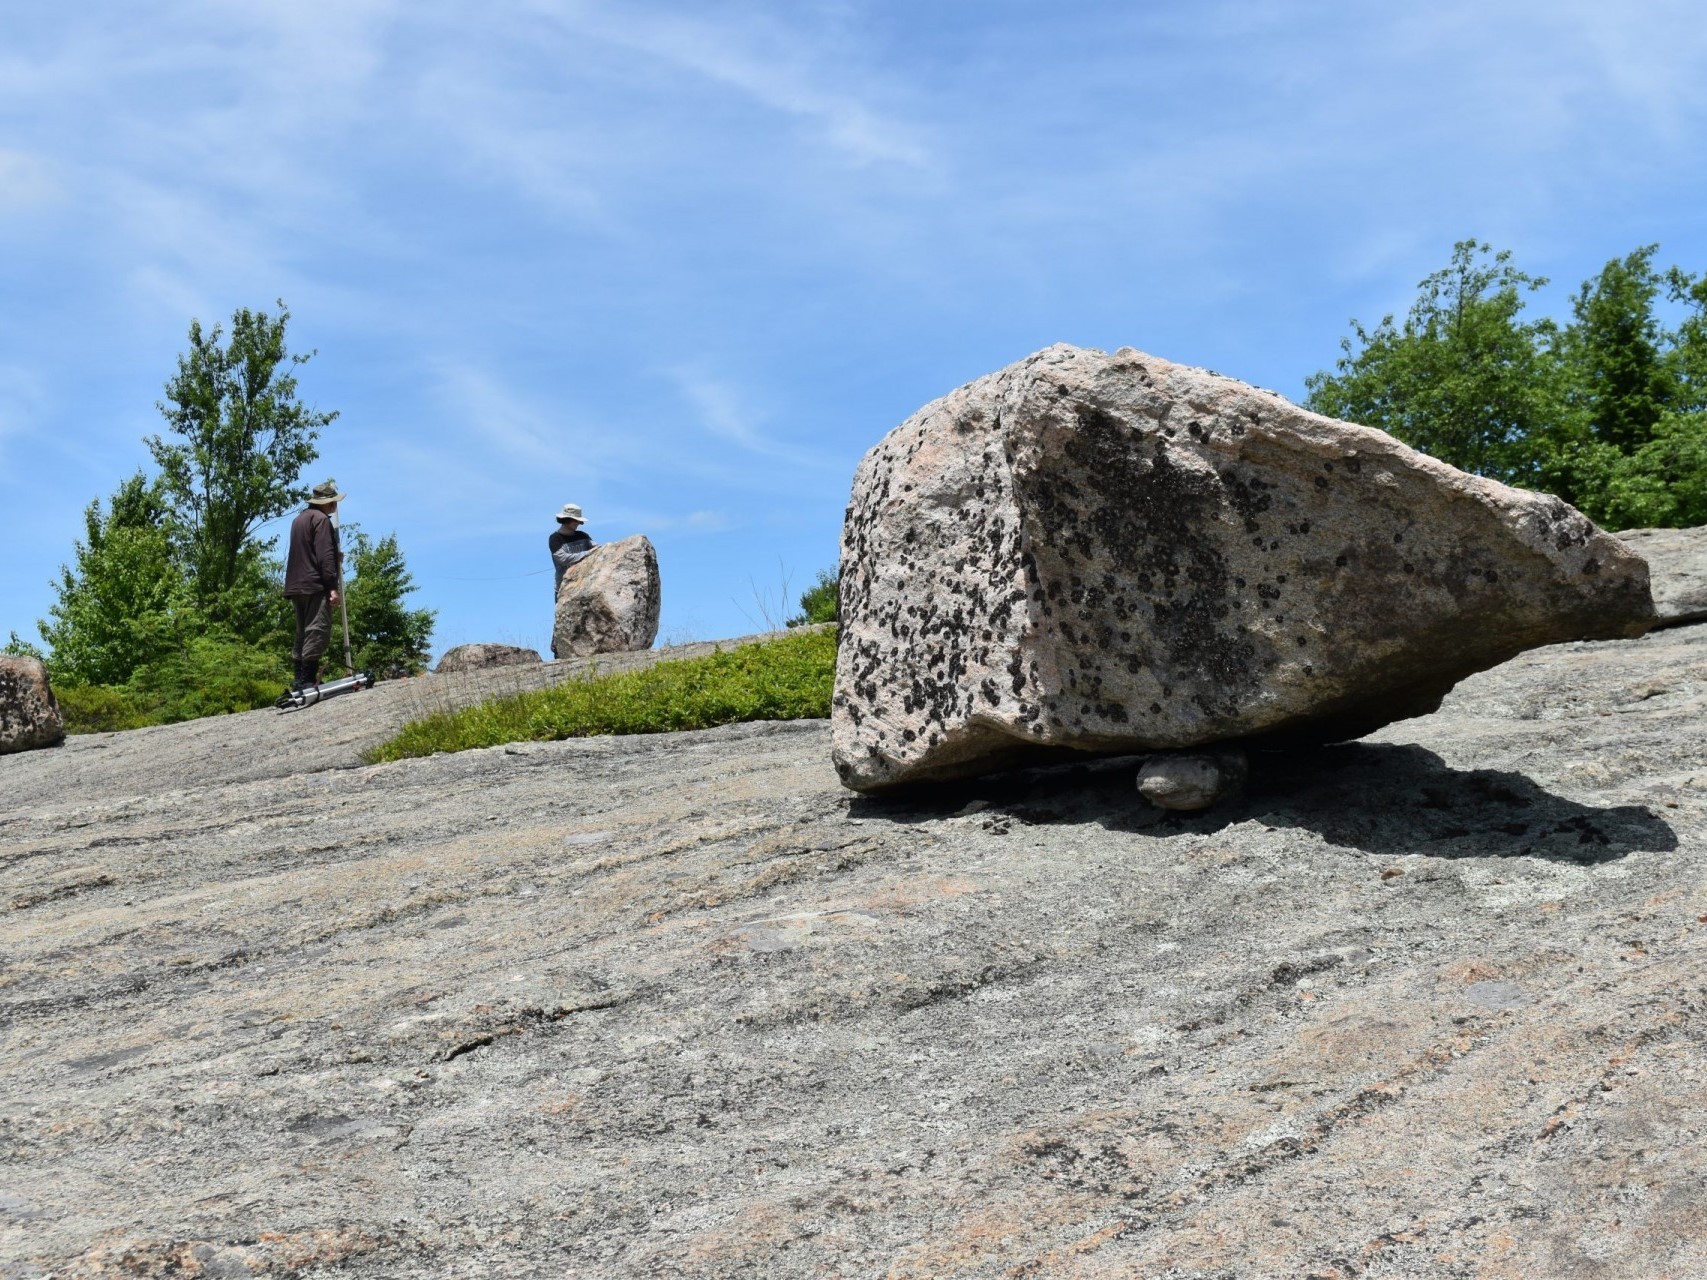 Precariously balanced boulders near New York City dropped by glaciers at the end of the last ice age may hold clues to the maximum size of earthquakes the region could suffer. Here, researchers at Black Rock Mountain, north of the city. Credit: Kevin Krajick/Earth Institute